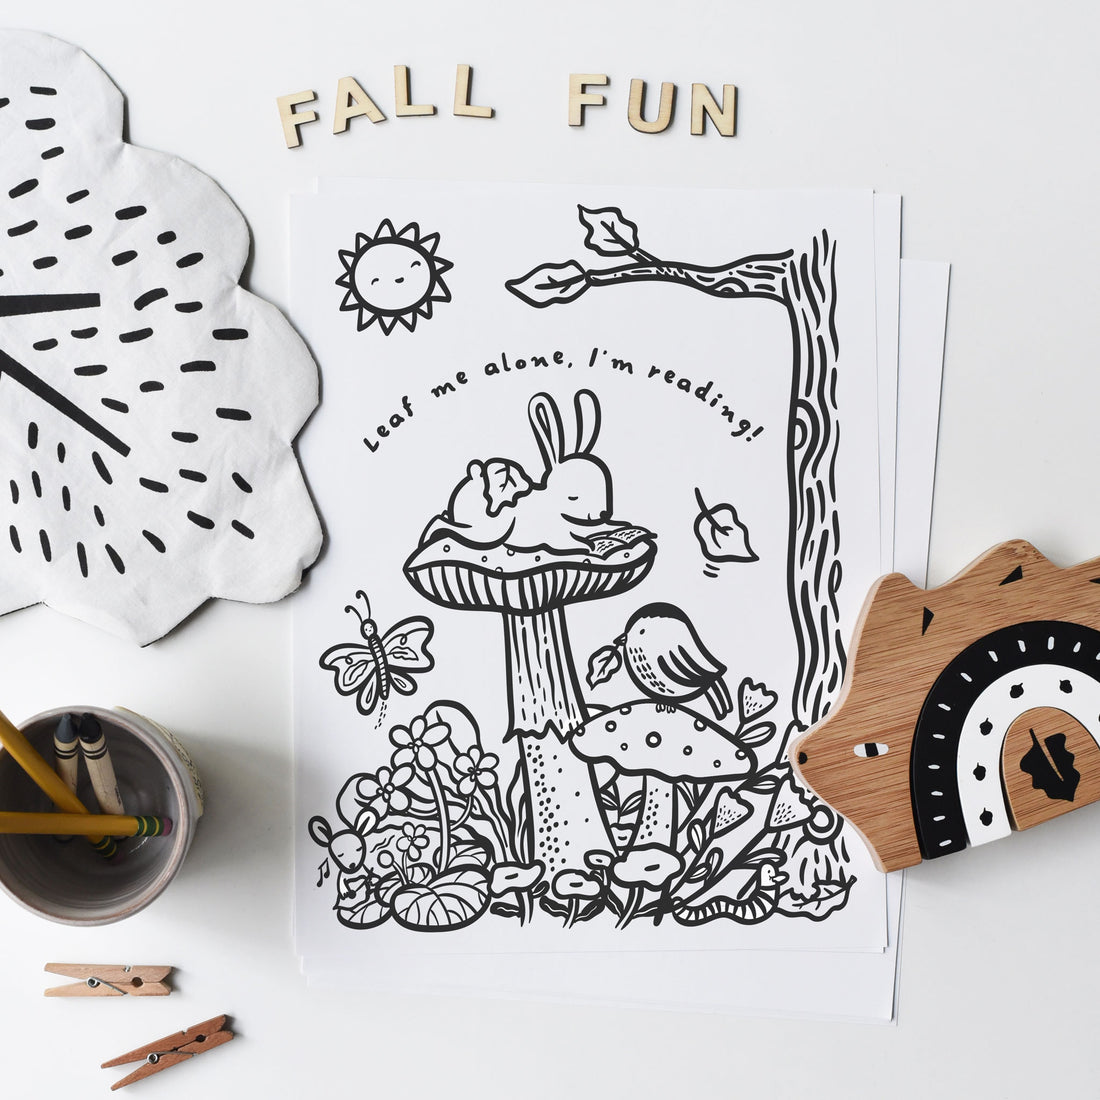 FALL FUN! FOUR FREE ACTIVITY PAGES FOR KIDS